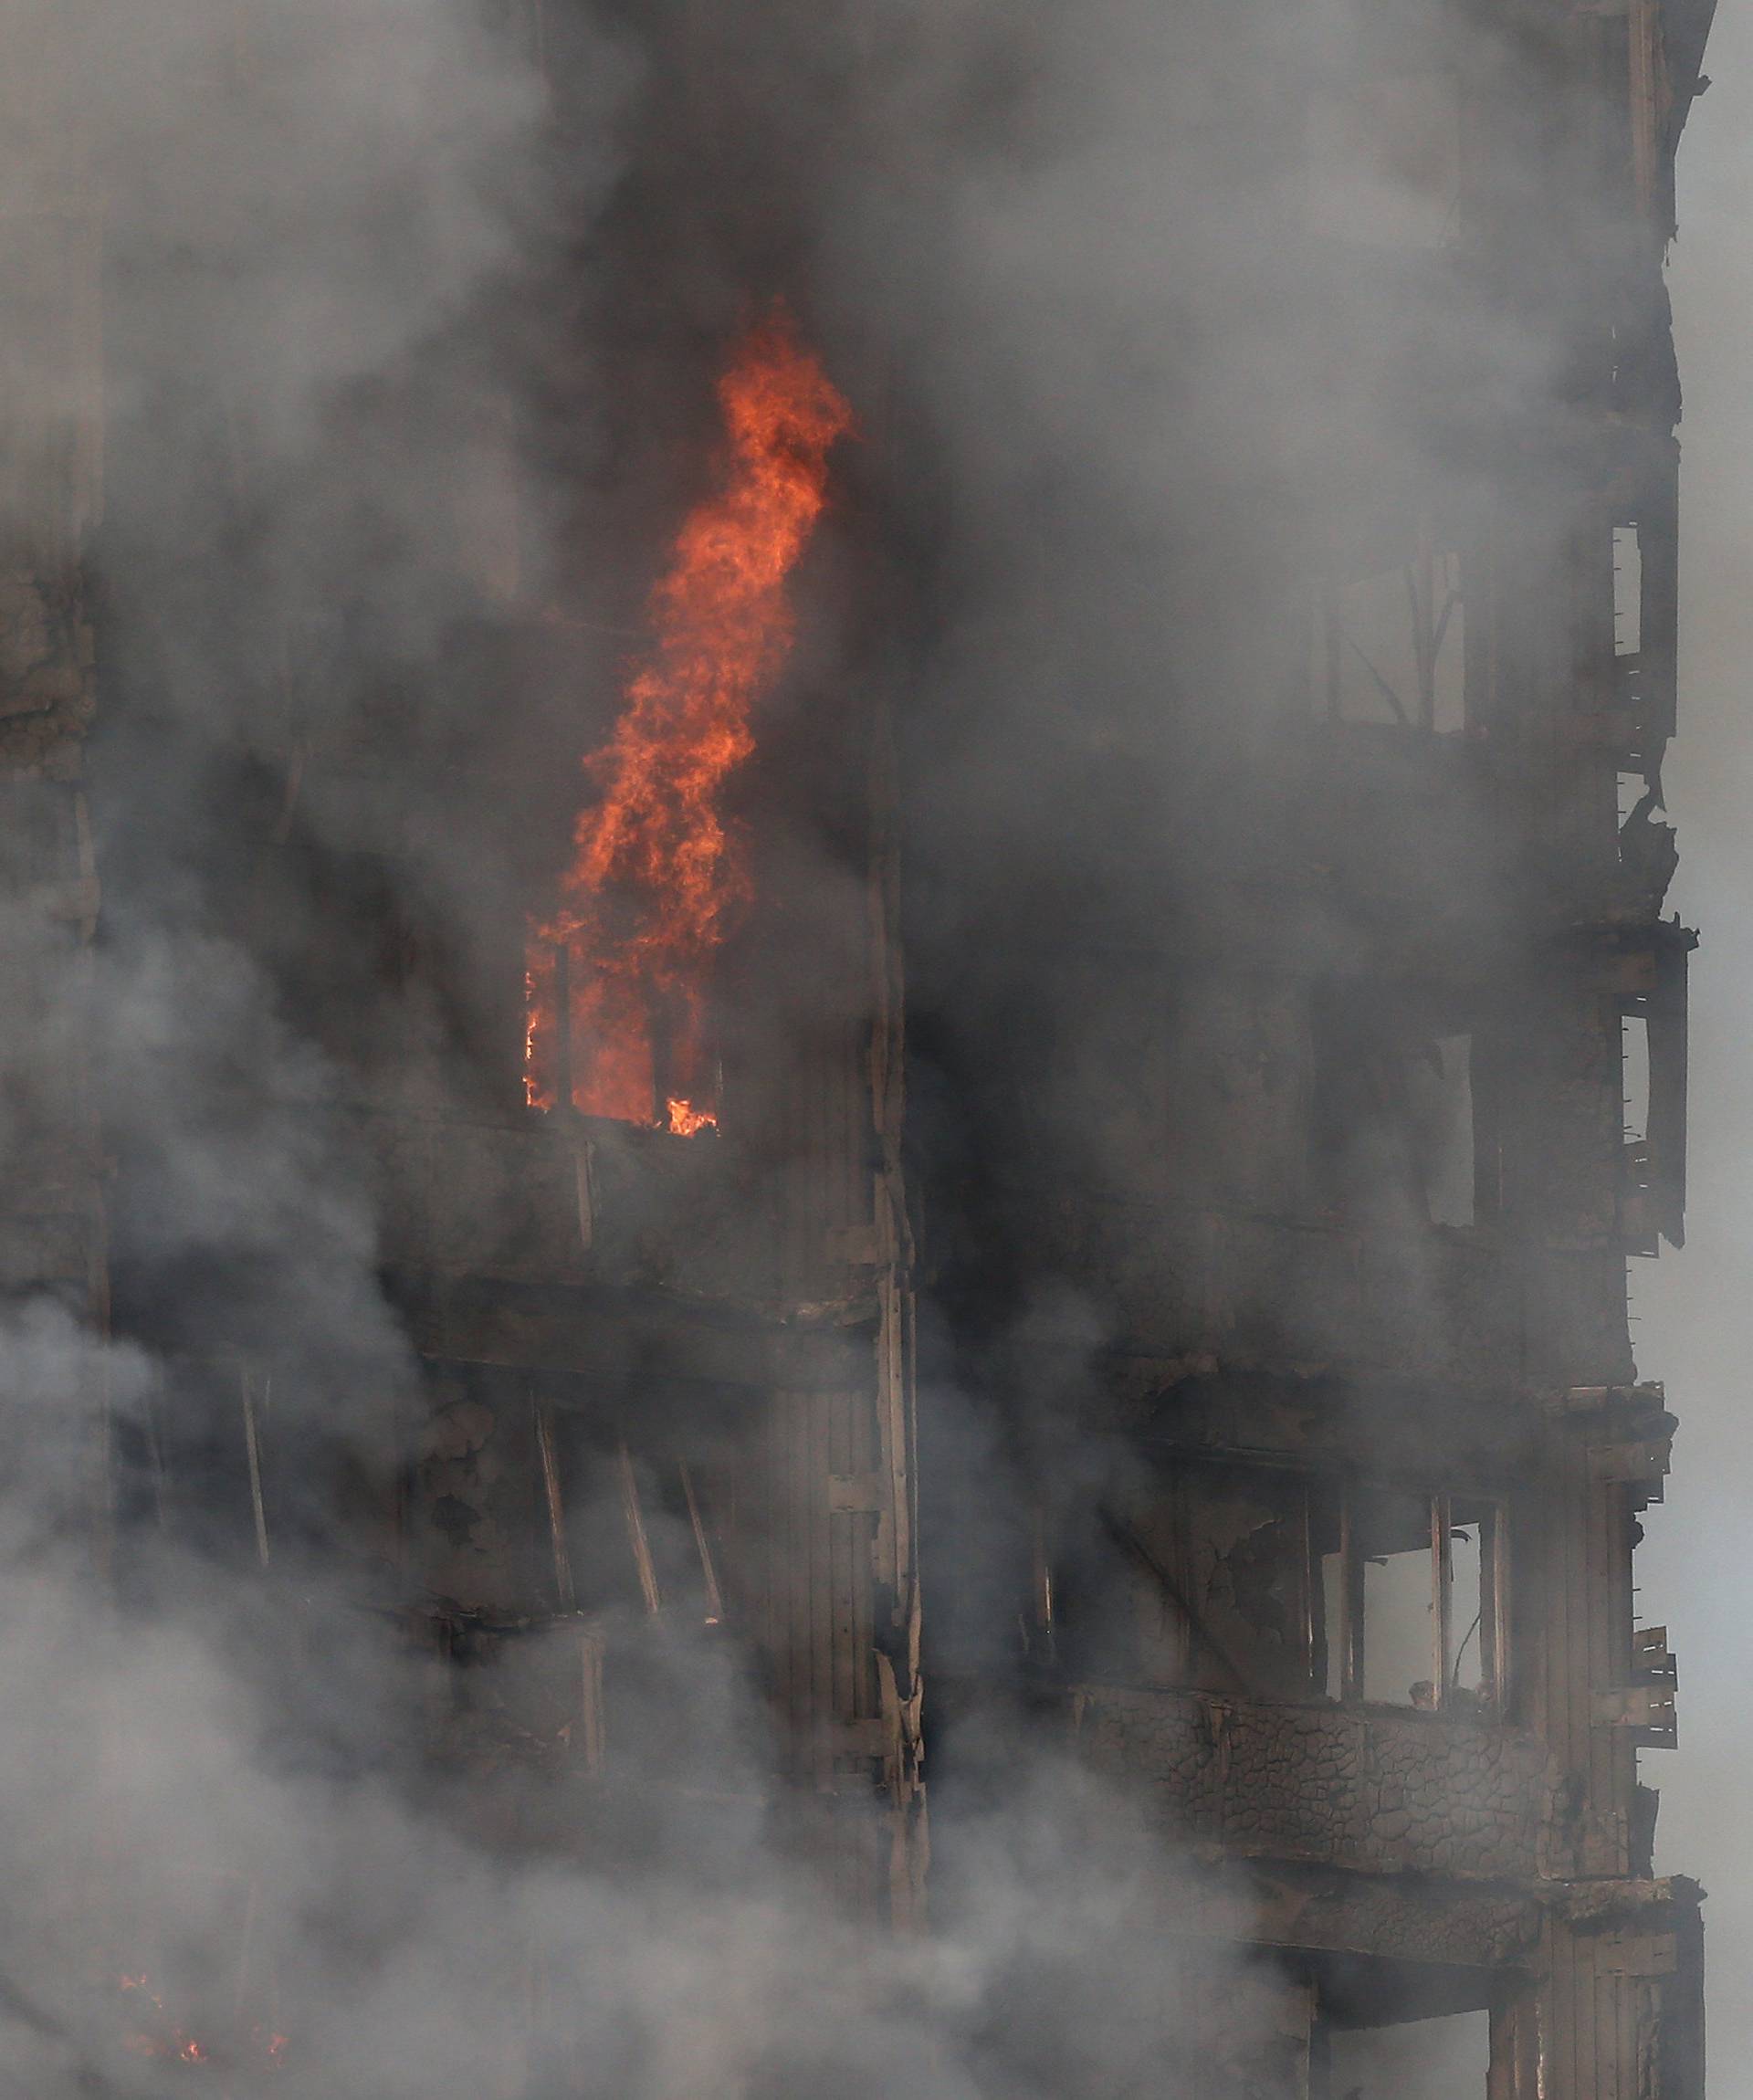 Smoke and flames billow as firefighters deal with a serious fire in a tower block at Latimer Road in West London